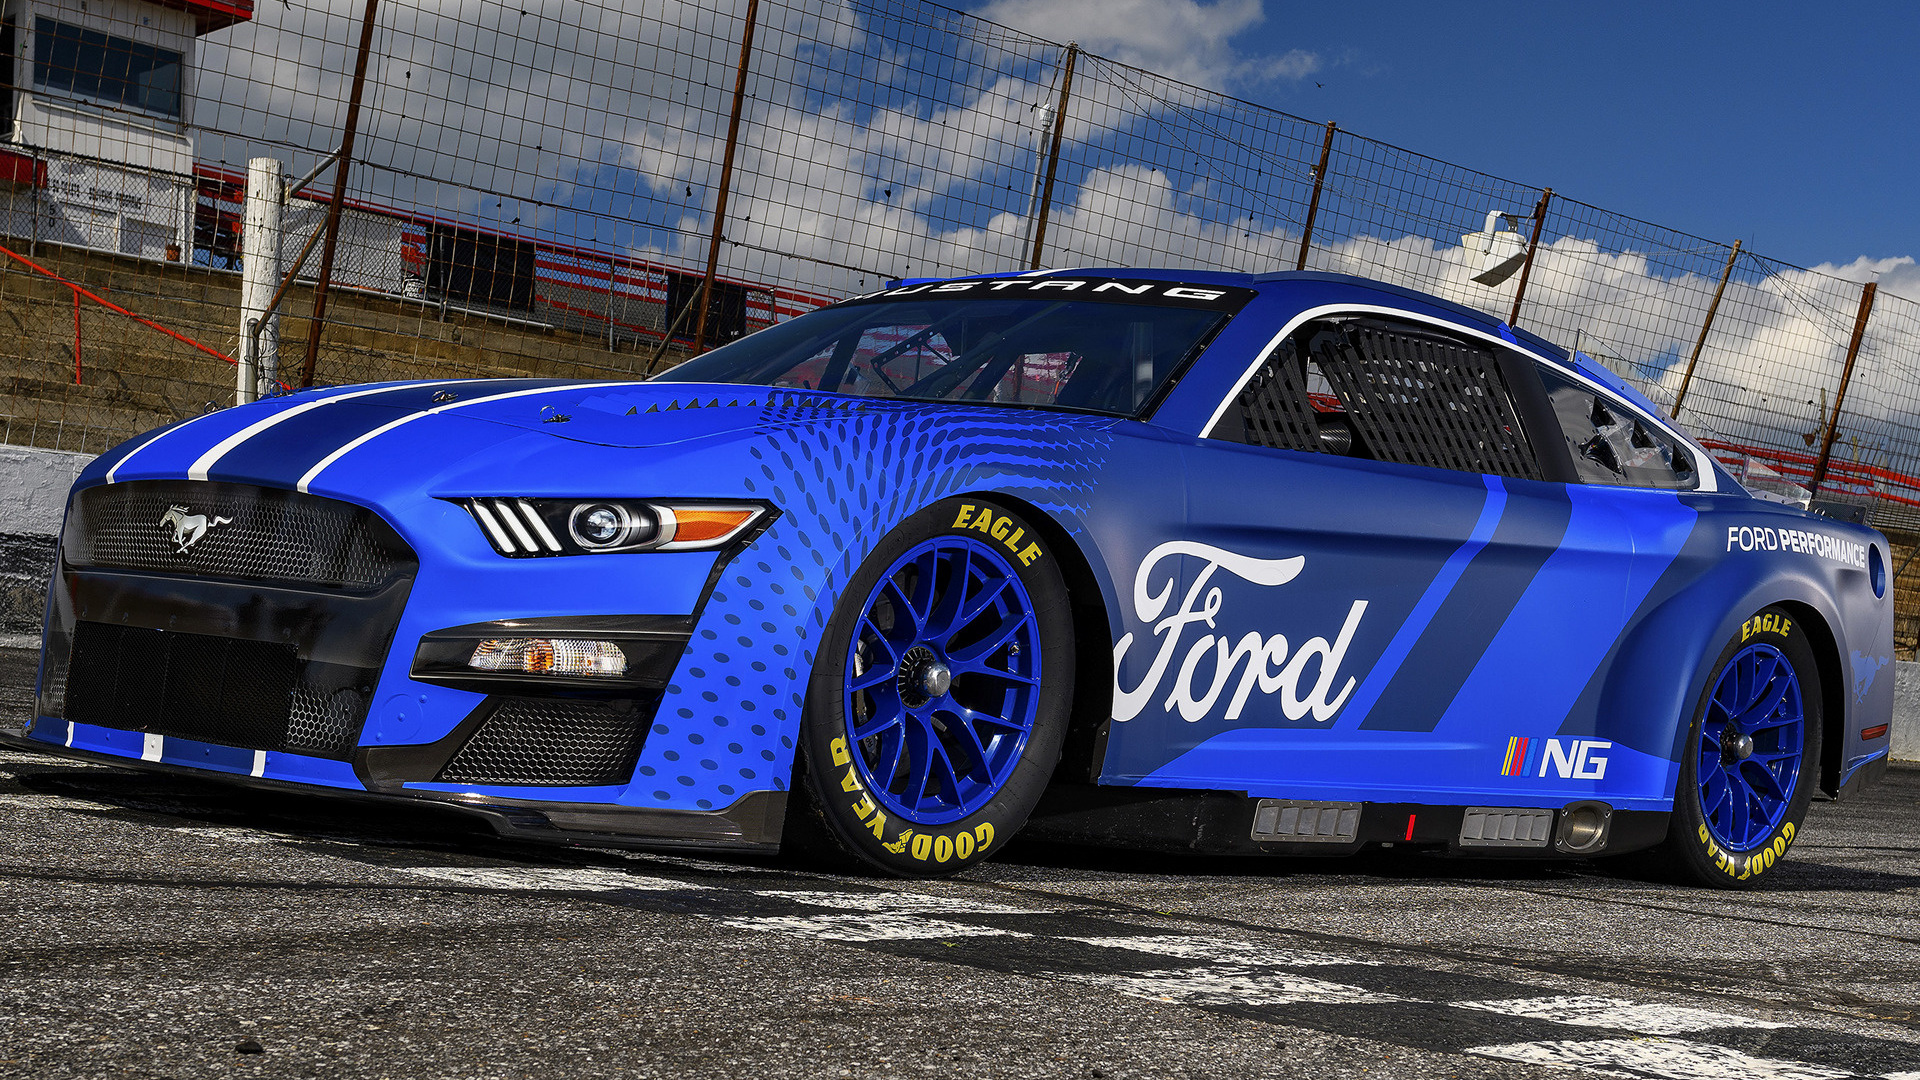 Mustang Of The Day: Ford Mustang NASCAR Race Car